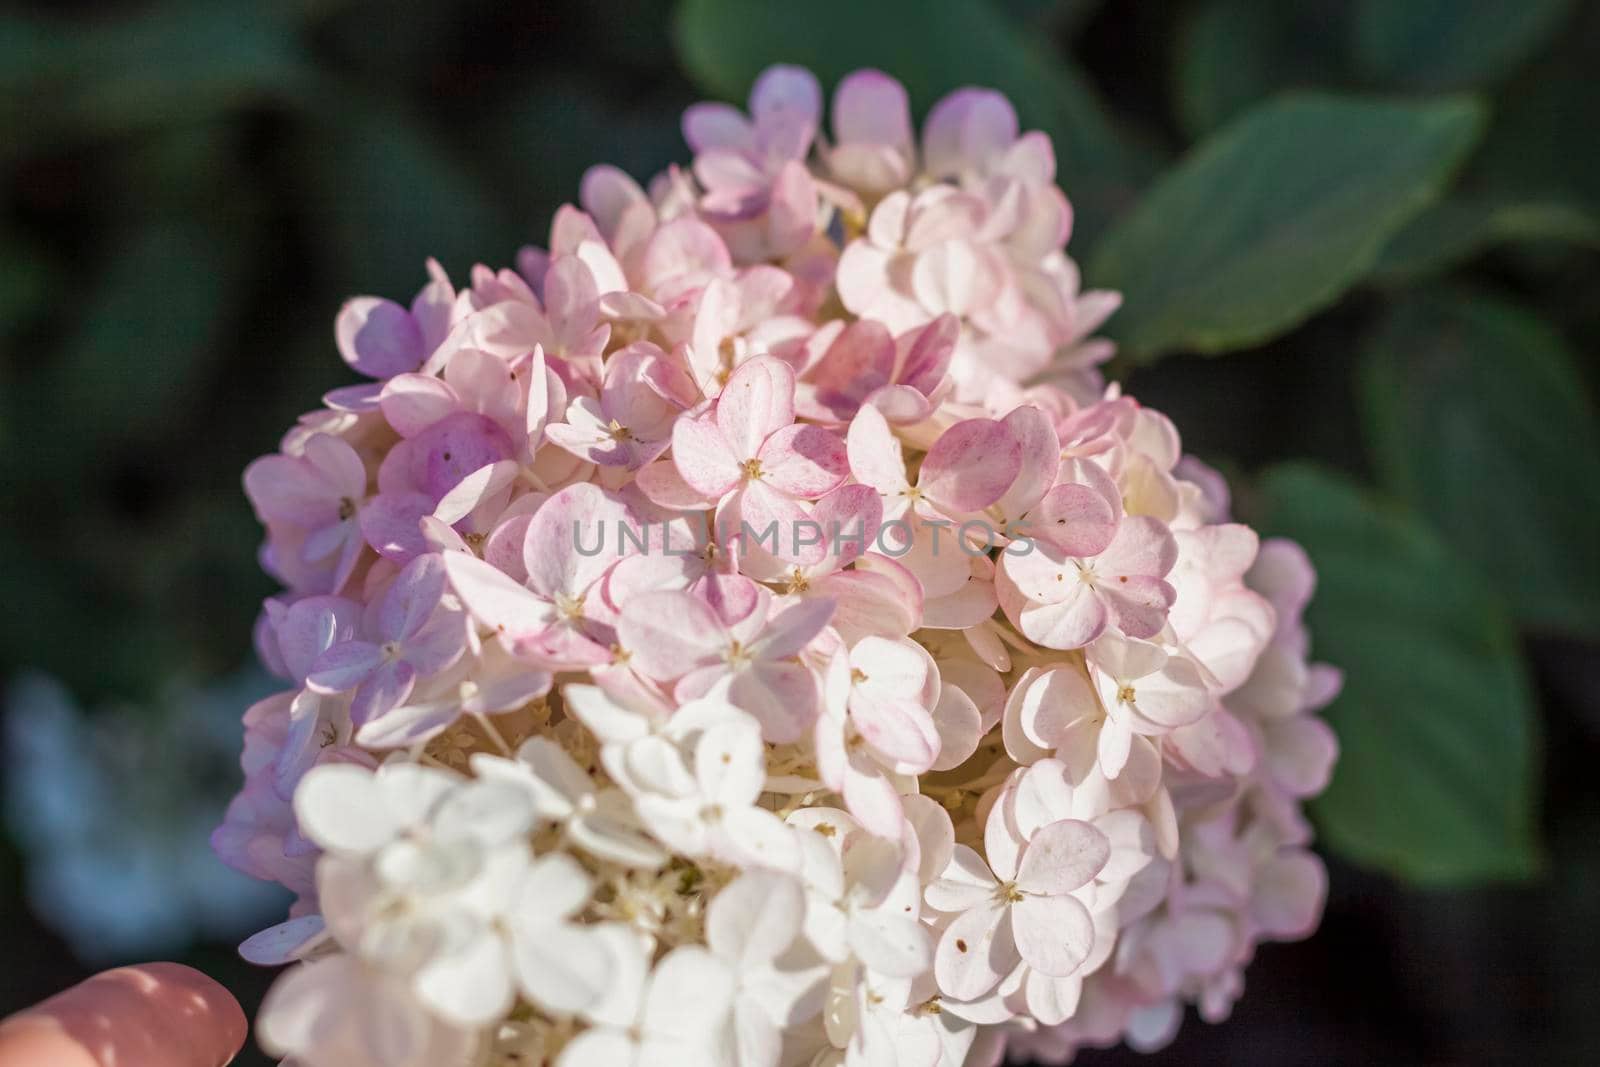 Hydrangea in the garden in a flowerbed under the open sky. Lush delightful huge inflorescence of white and pink hydrangeas in the garden.